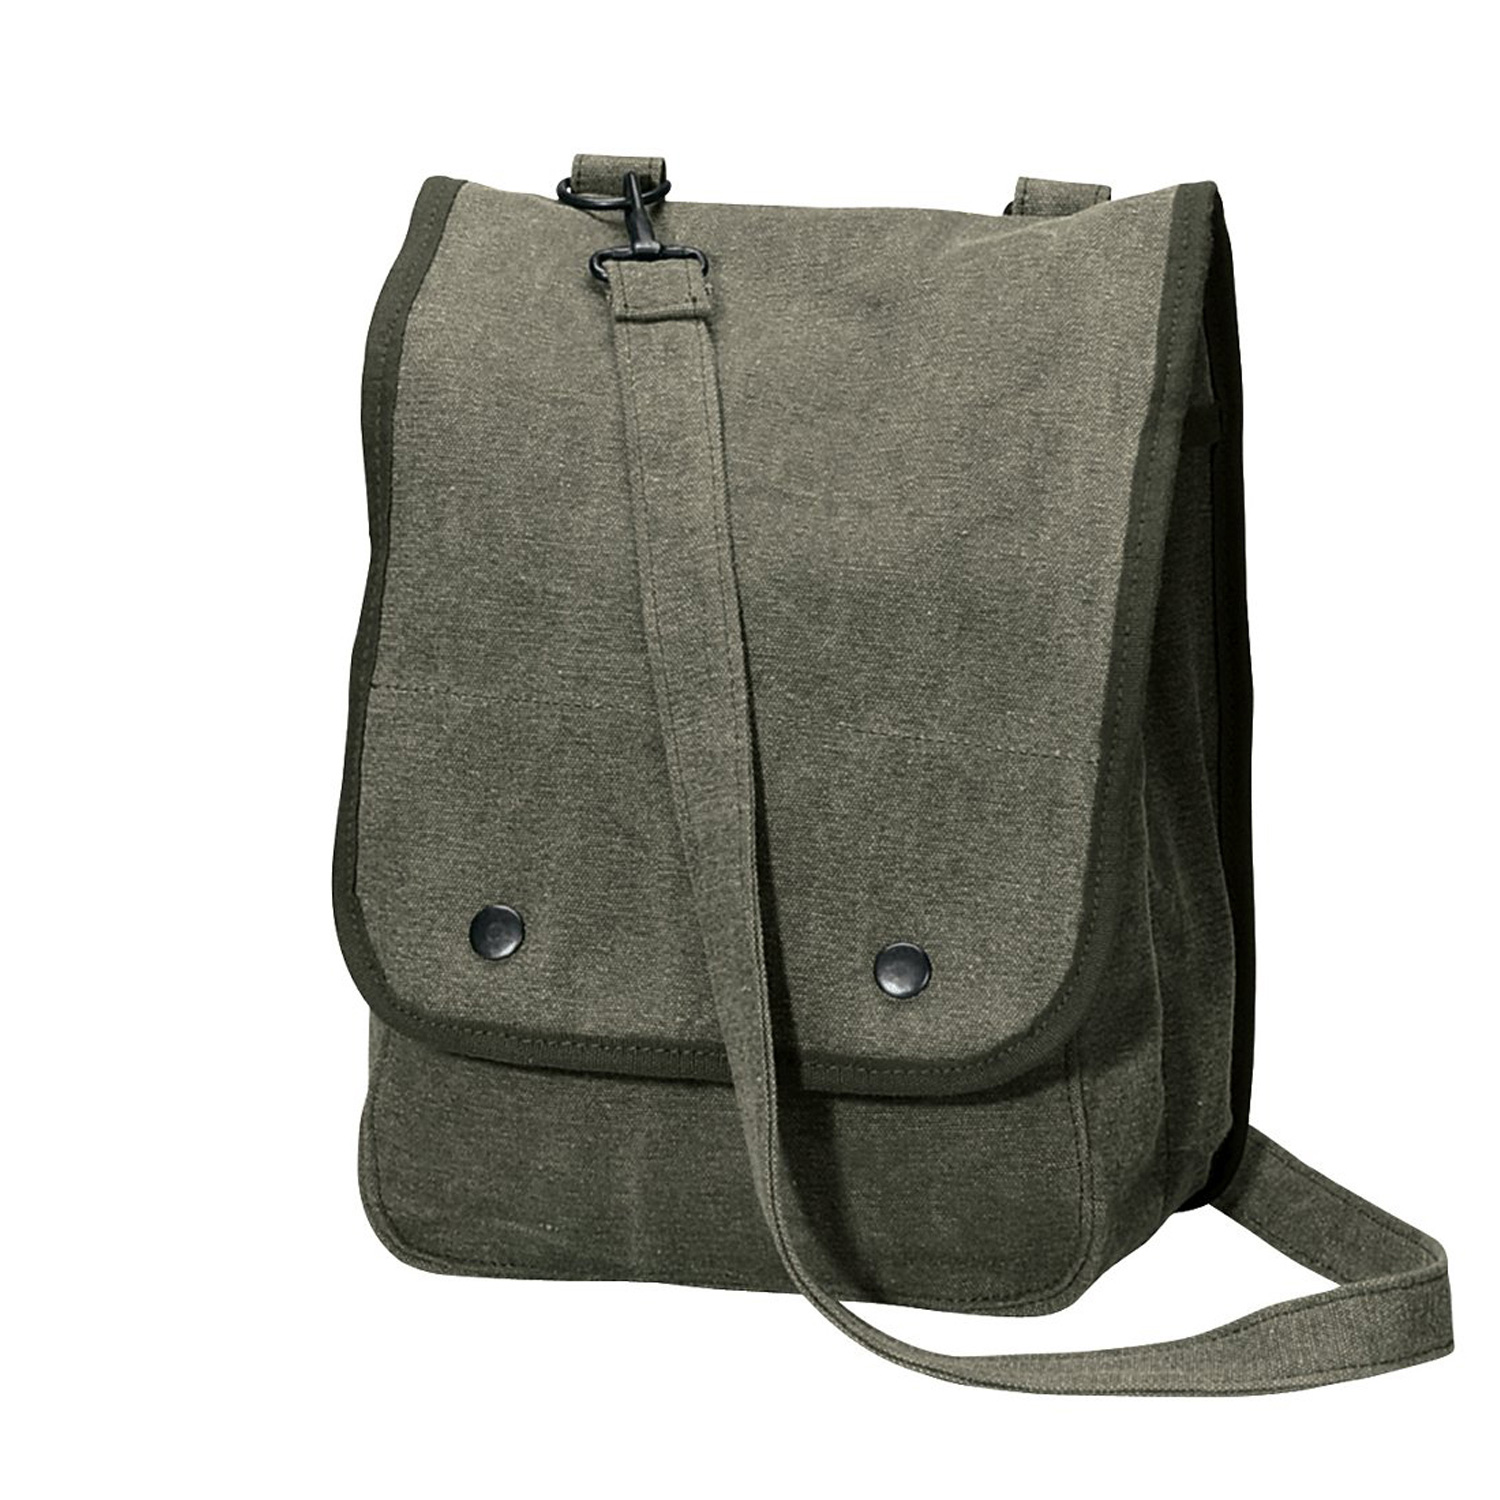 ROTHCO Deluxe Vintage Canvas MESSENGER Bag OLIV DRAB